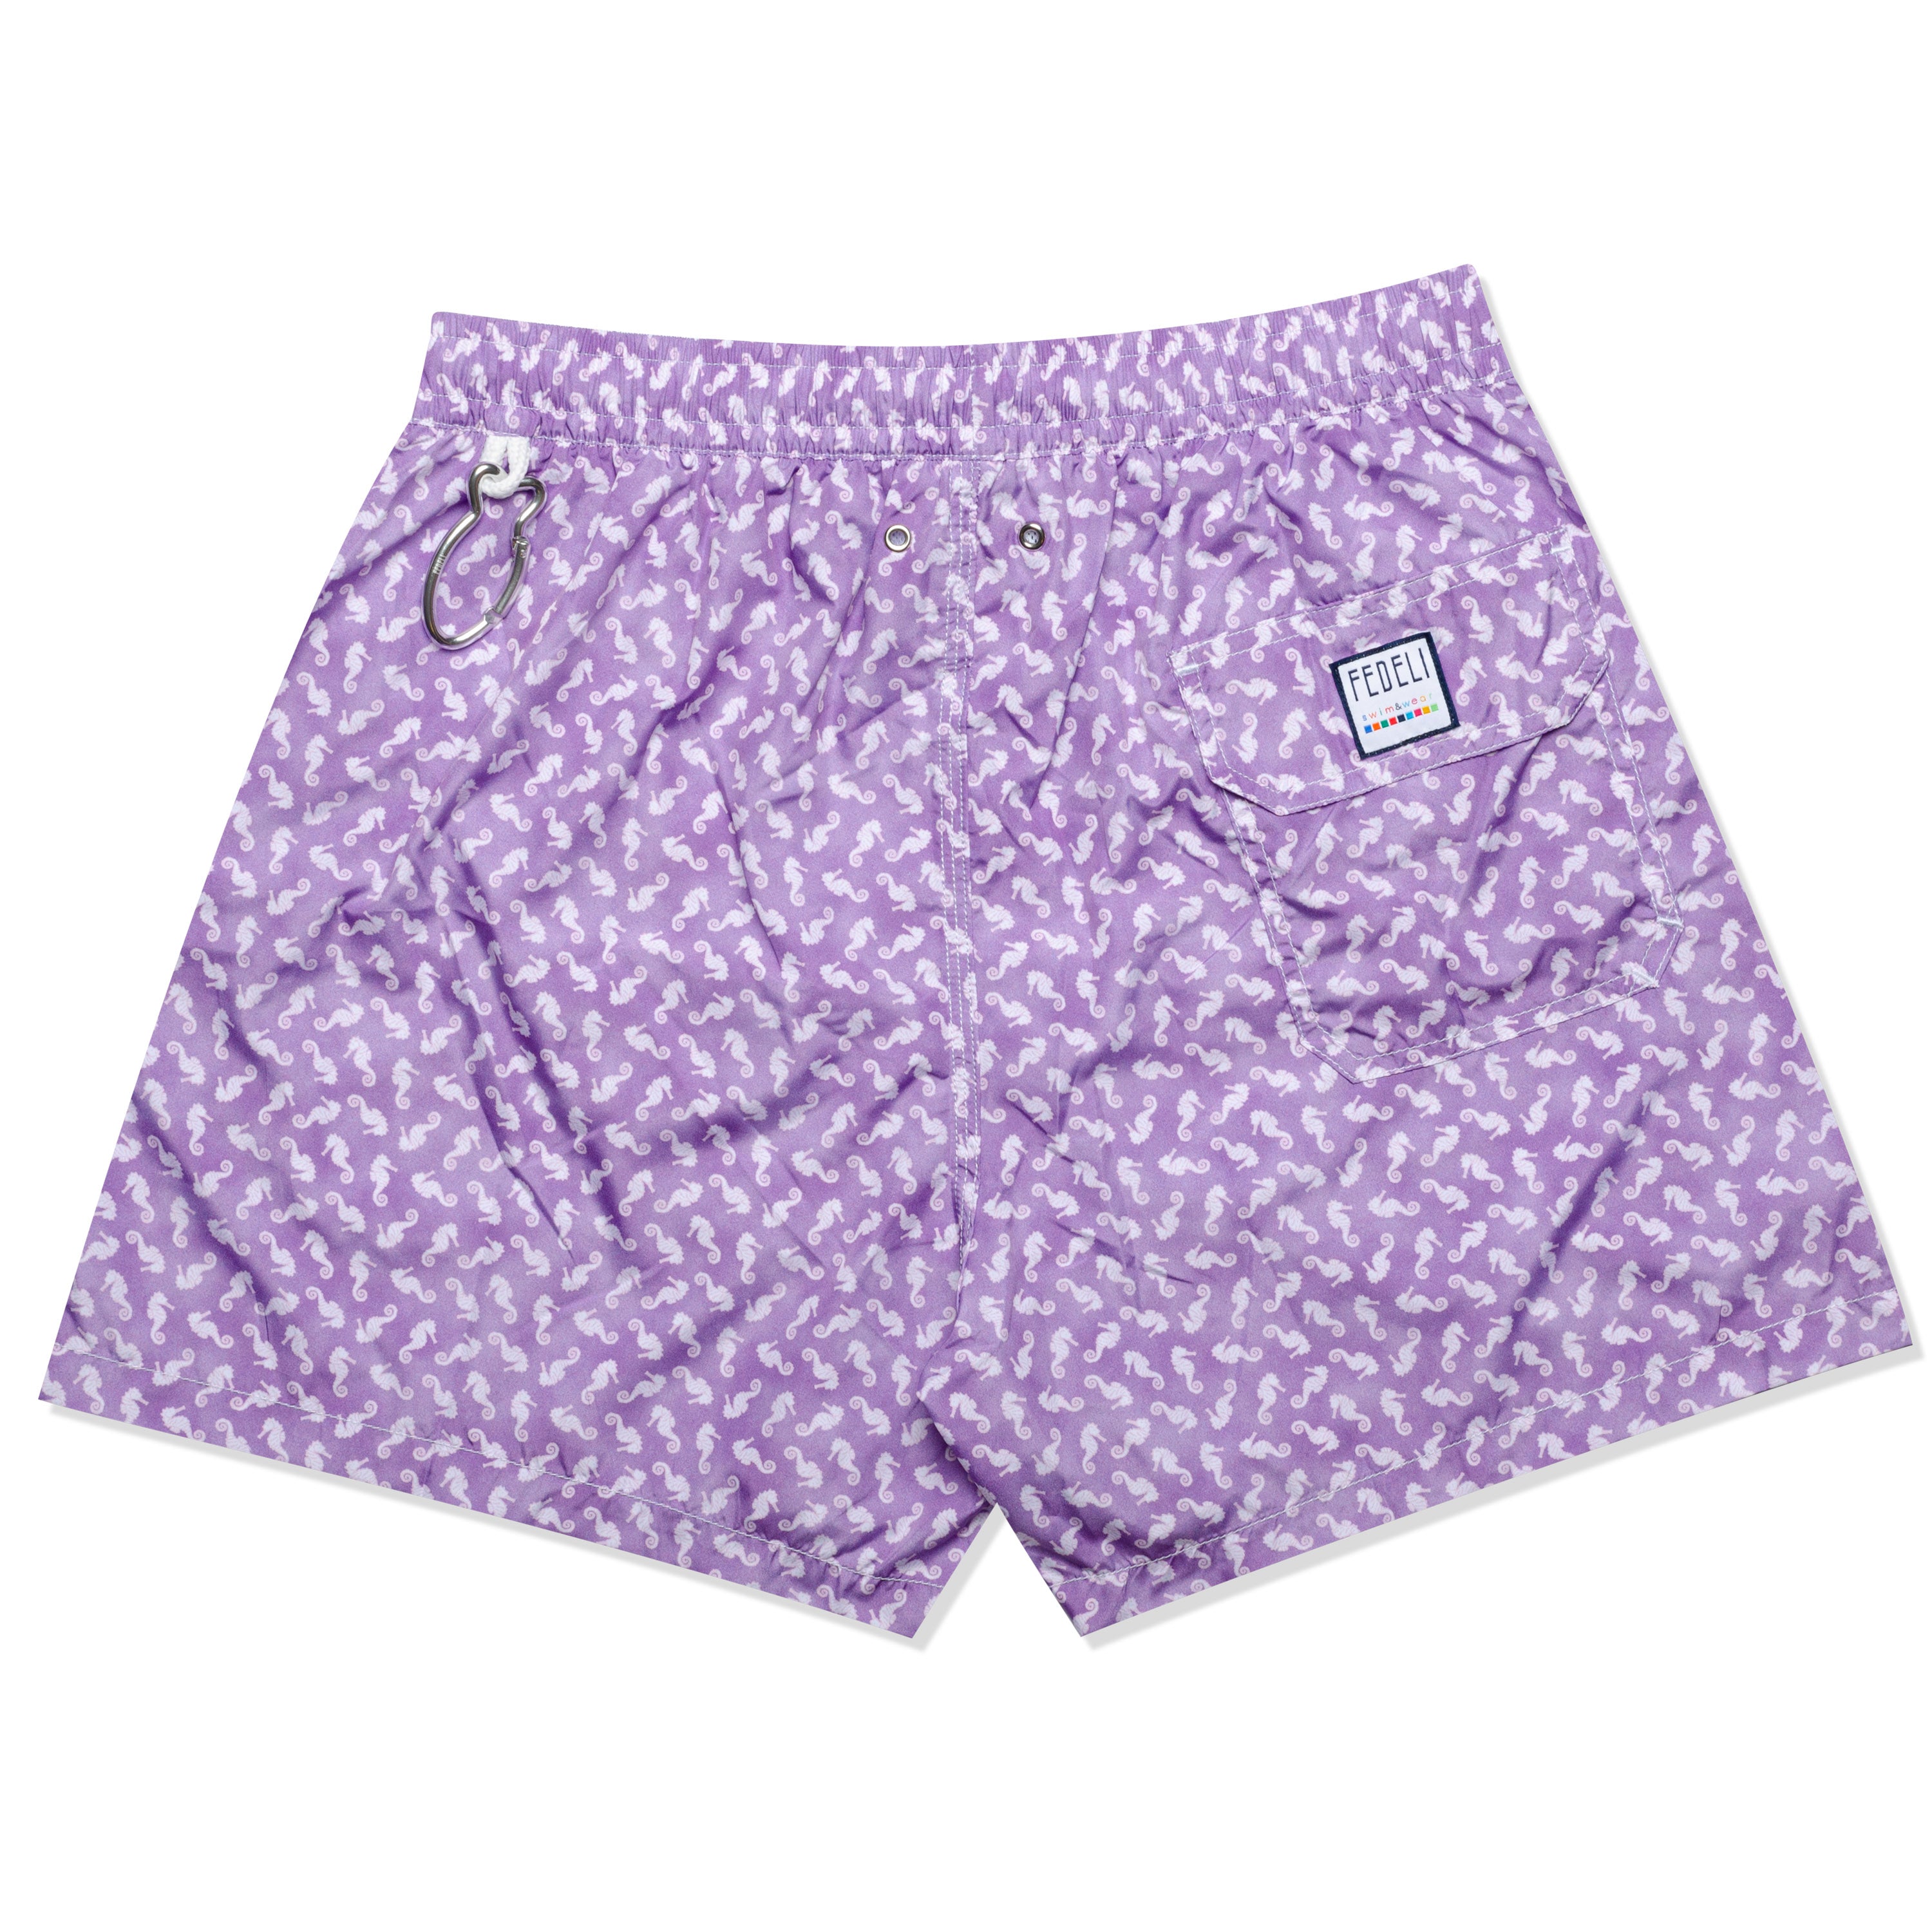 FEDELI Made in Italy Purple Seahorses Madeira Airstop Swim Shorts Trunks NEW FEDELI